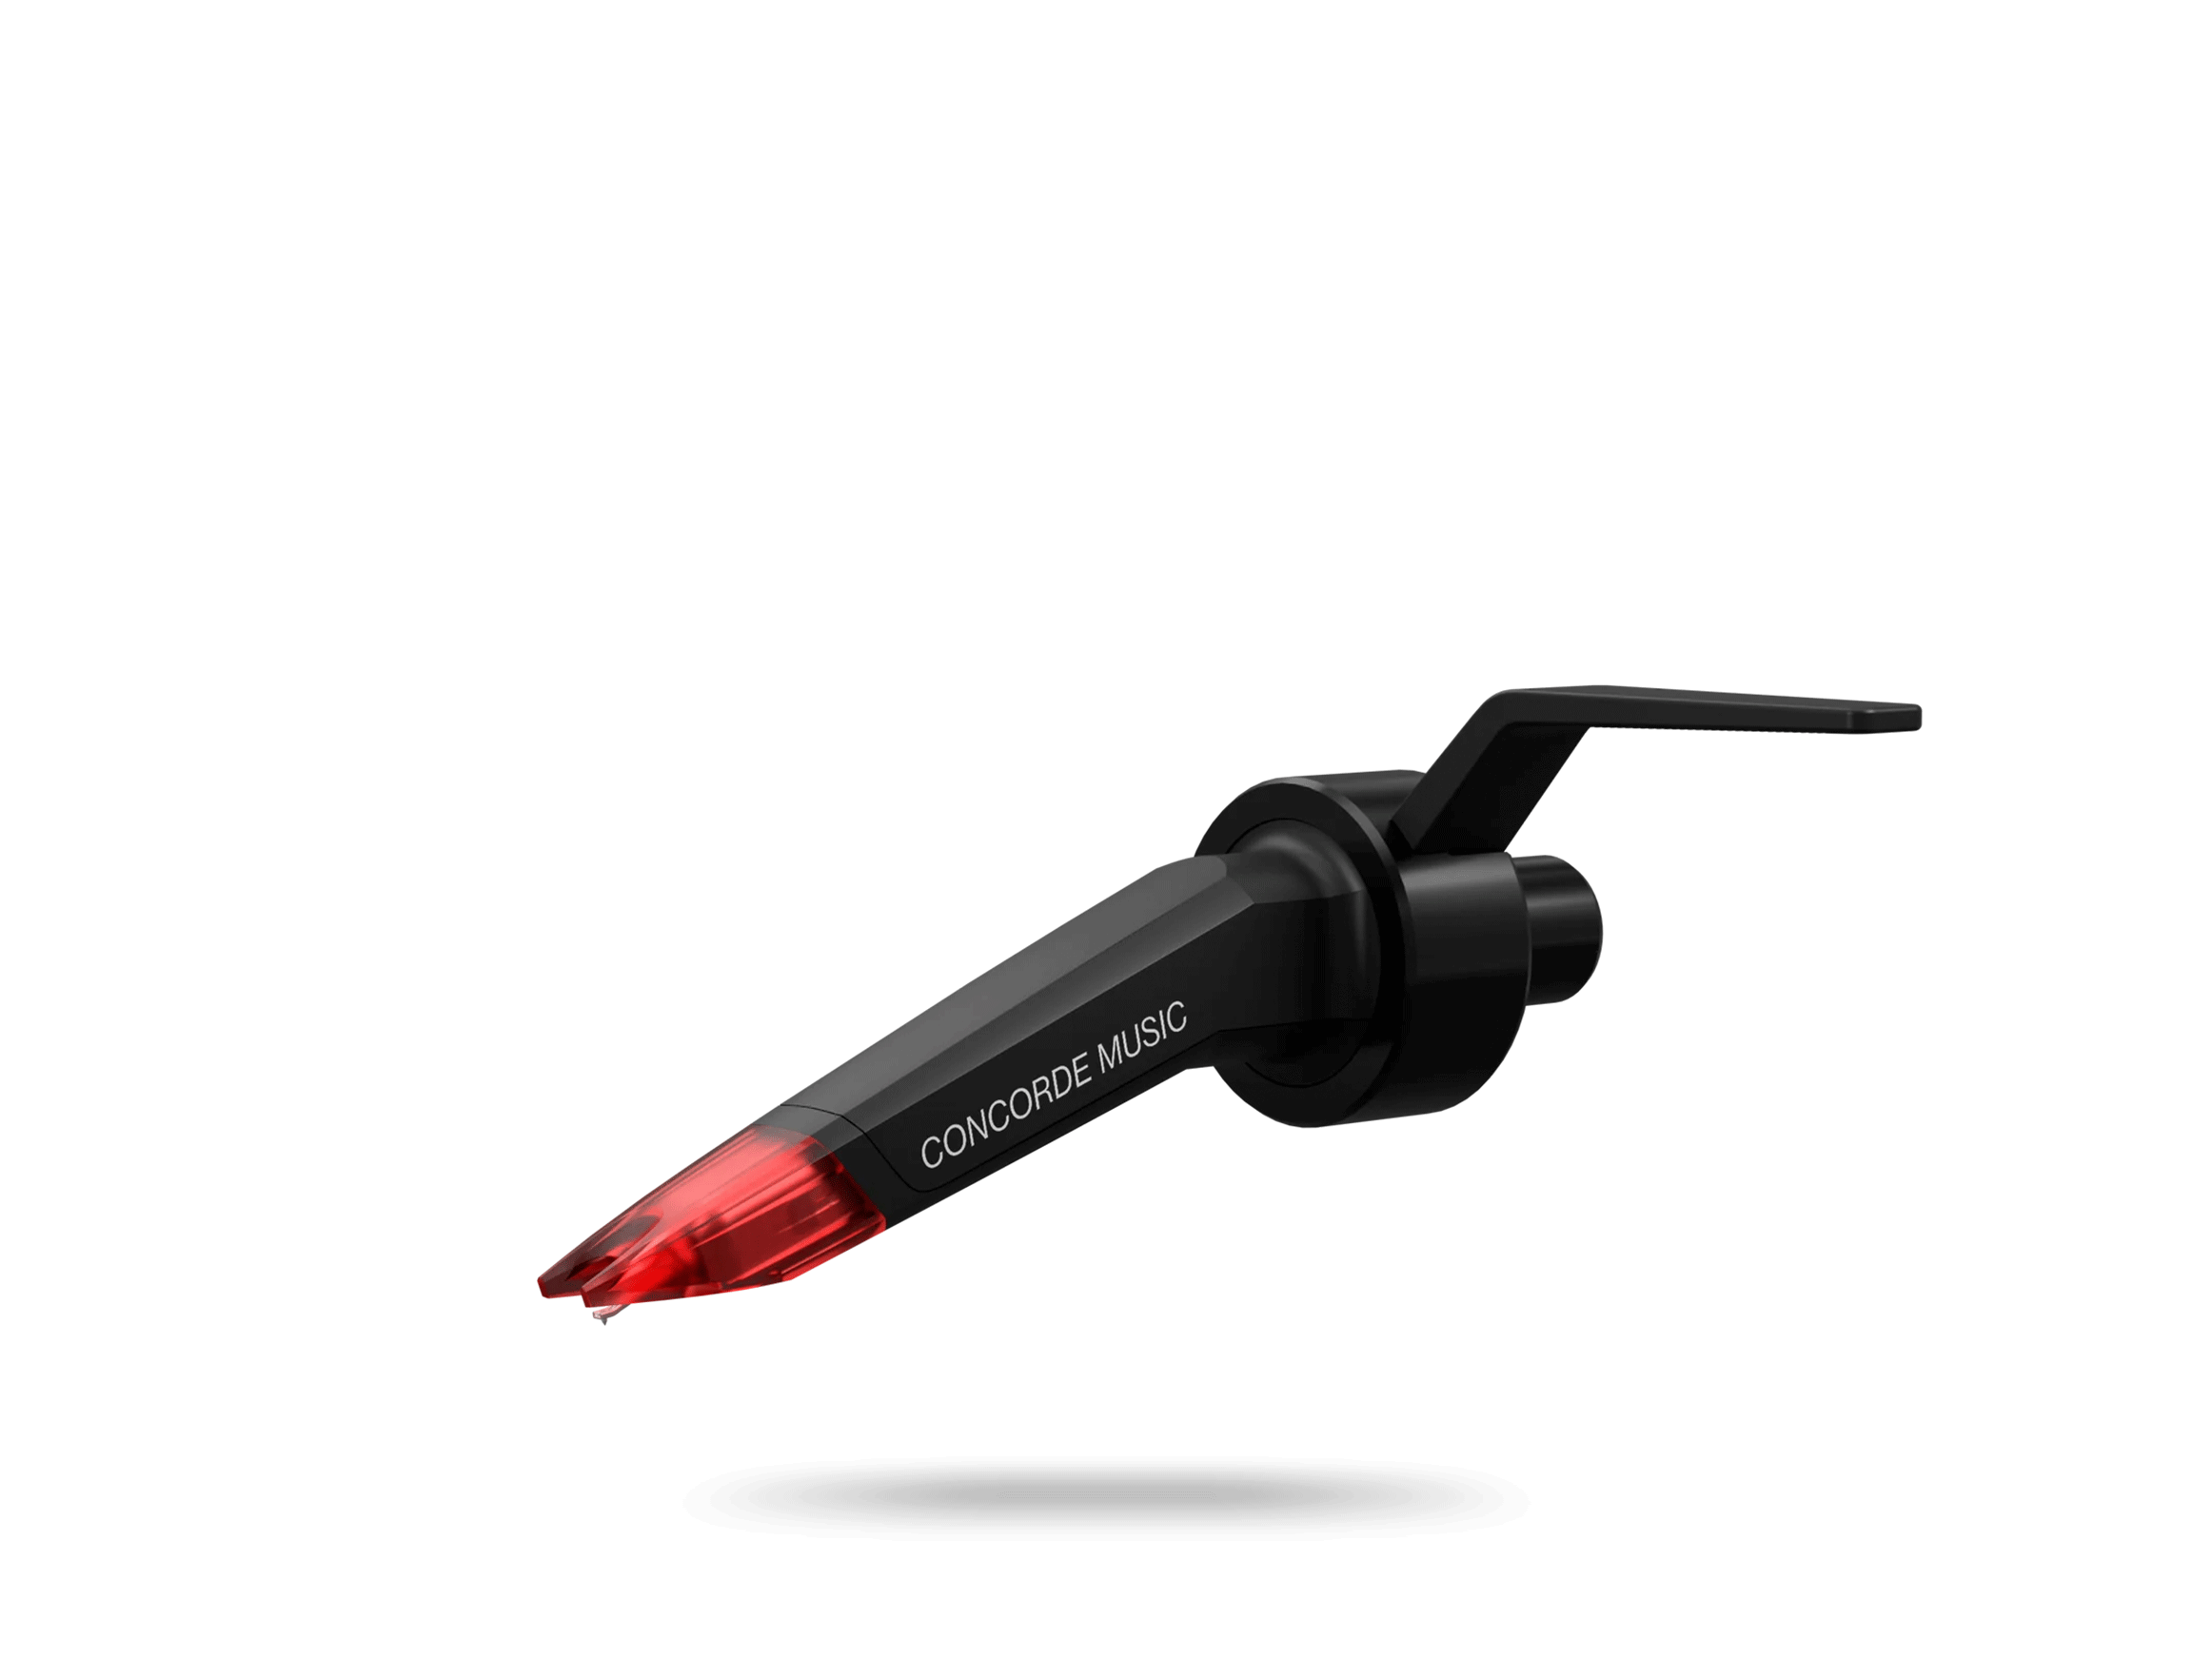 Concorde Music Red